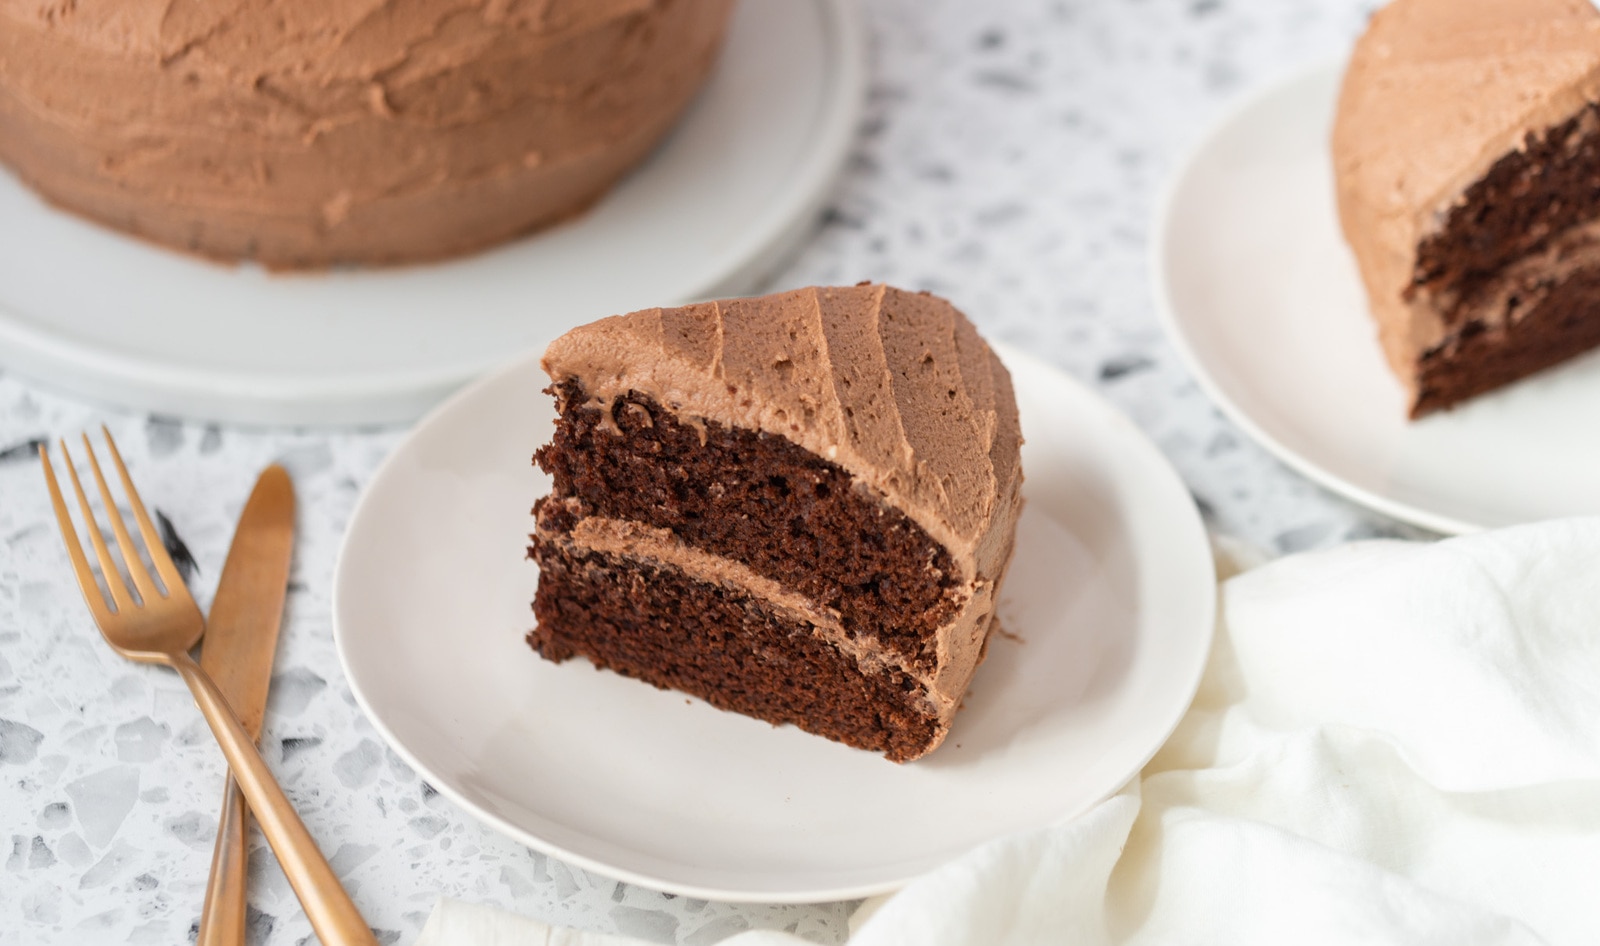 First, the Vegan Carrot Cake. Now, We Have the Famous Chocolate Cake.